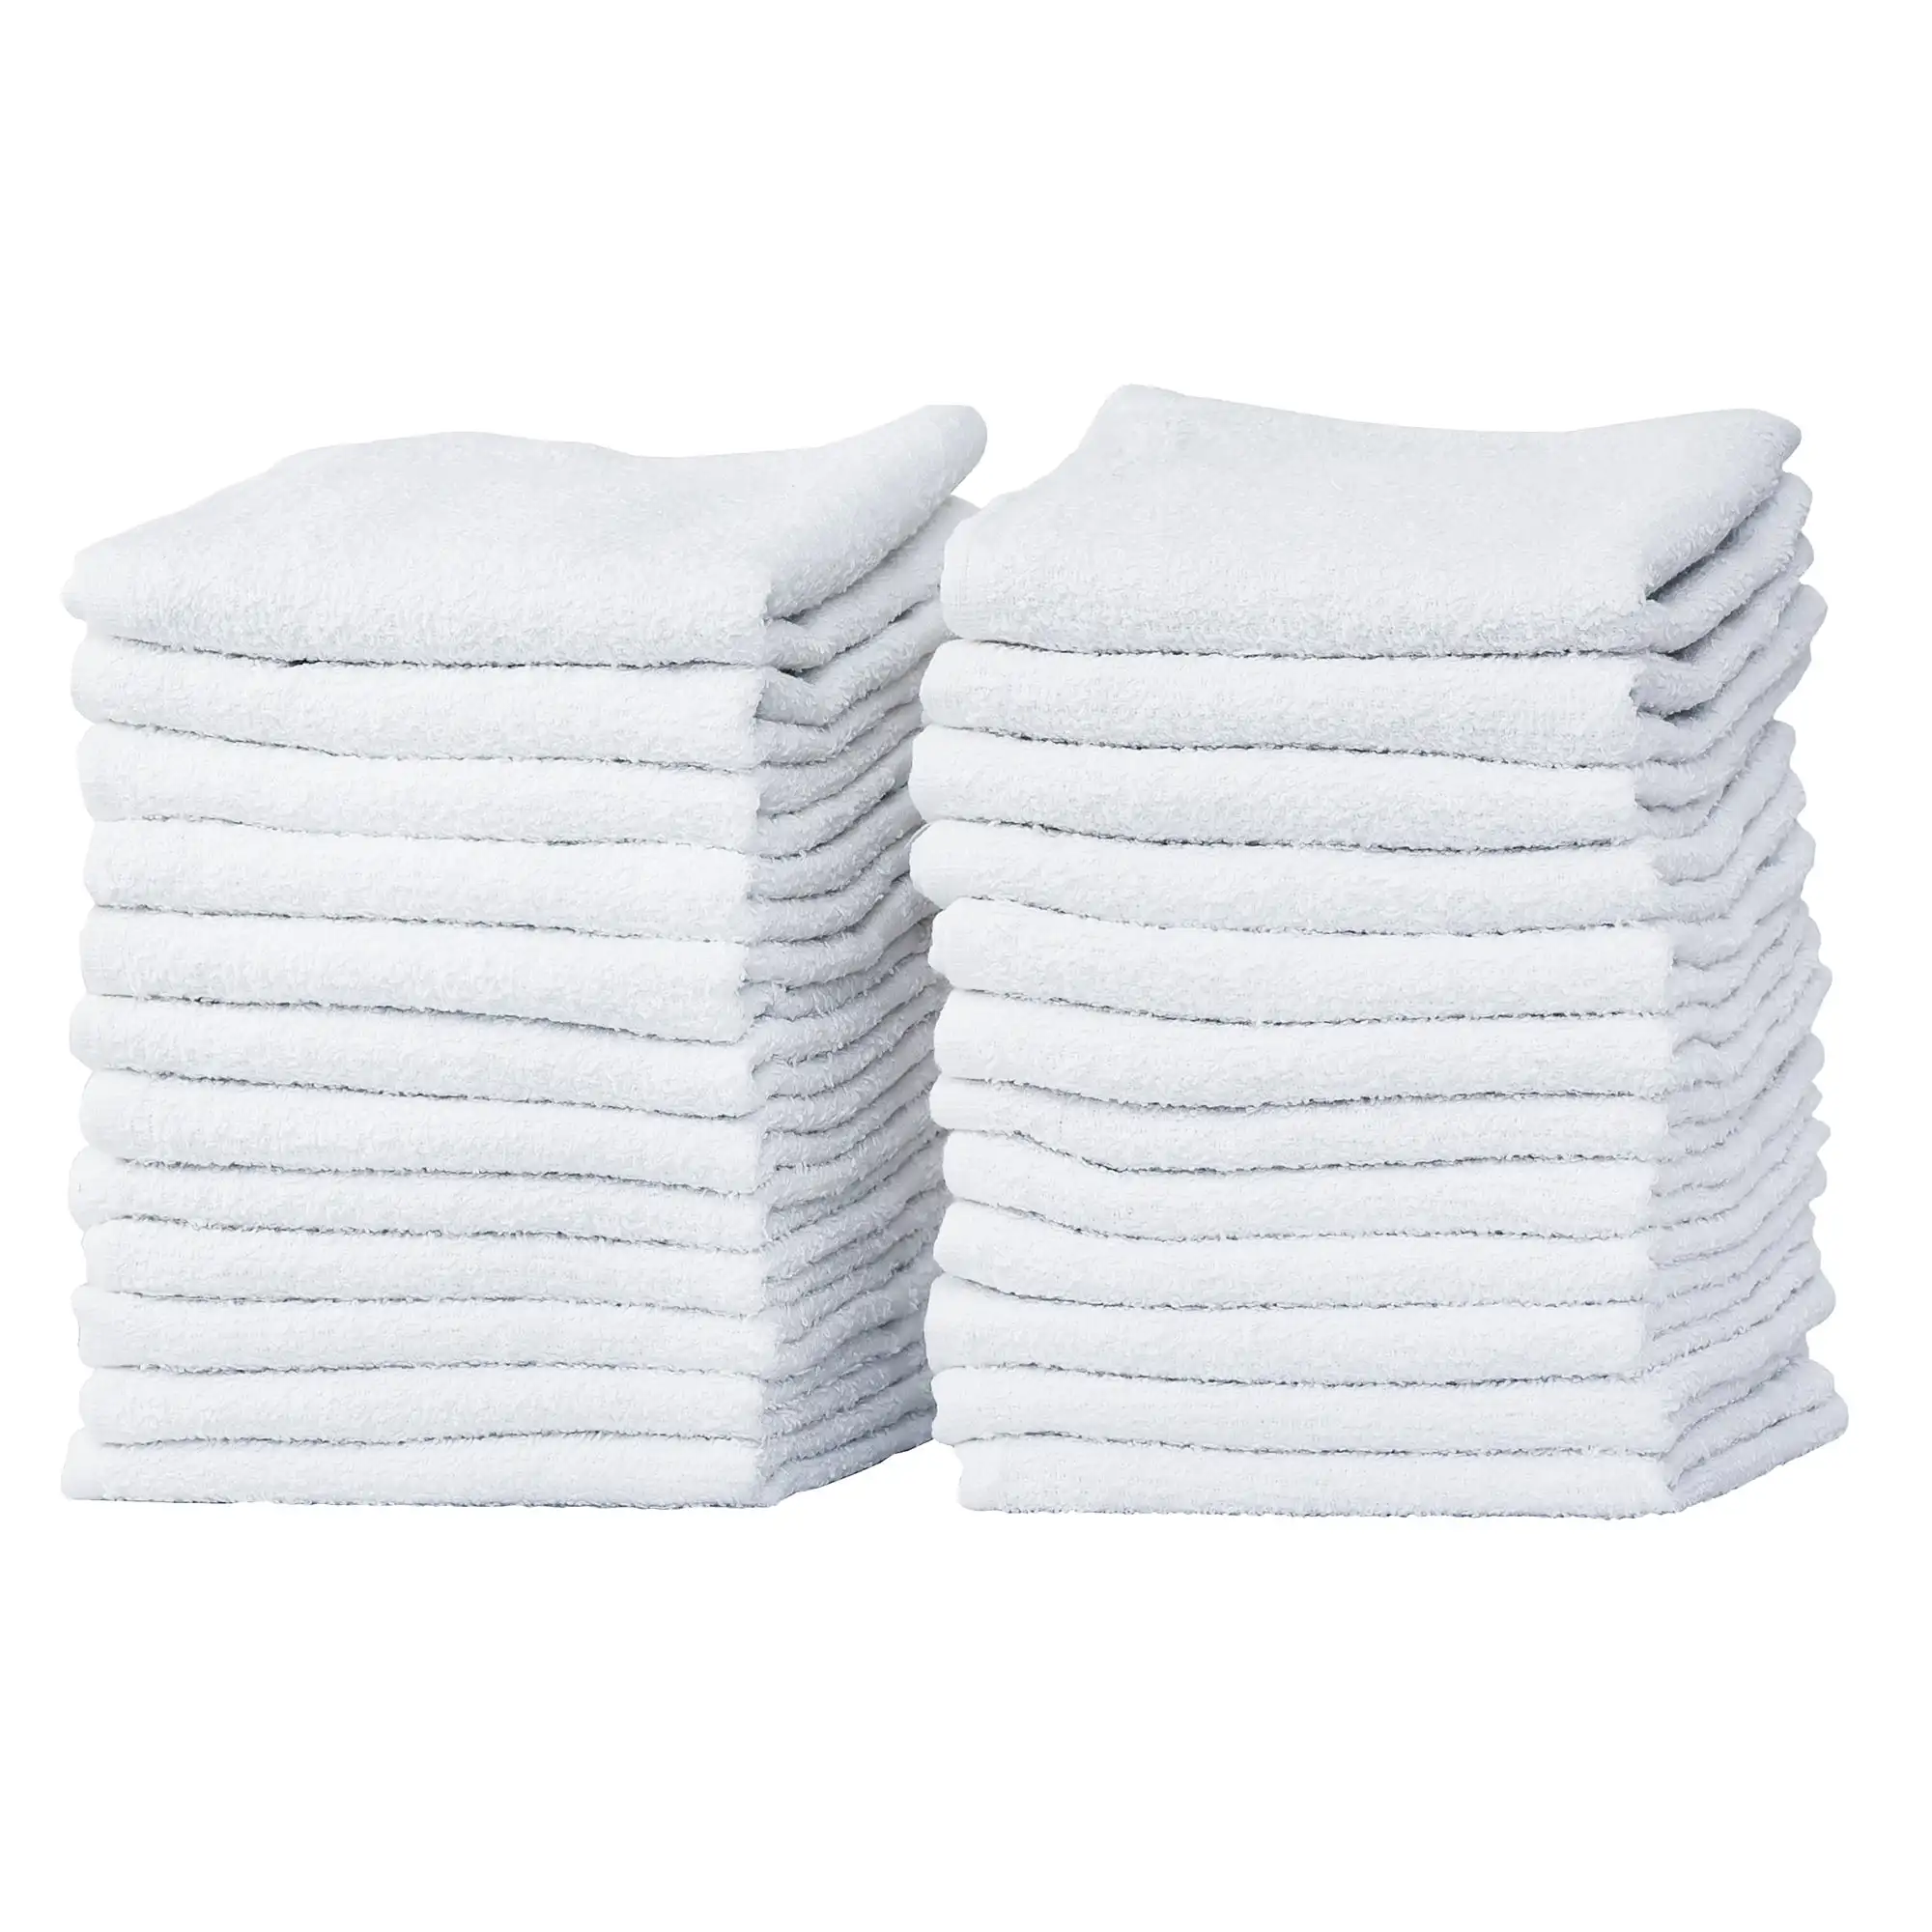 

24-Pack White 100% Cotton Towel Washcloths, Durable, Lightweight, Commercial Grade and Ultra Absorbent